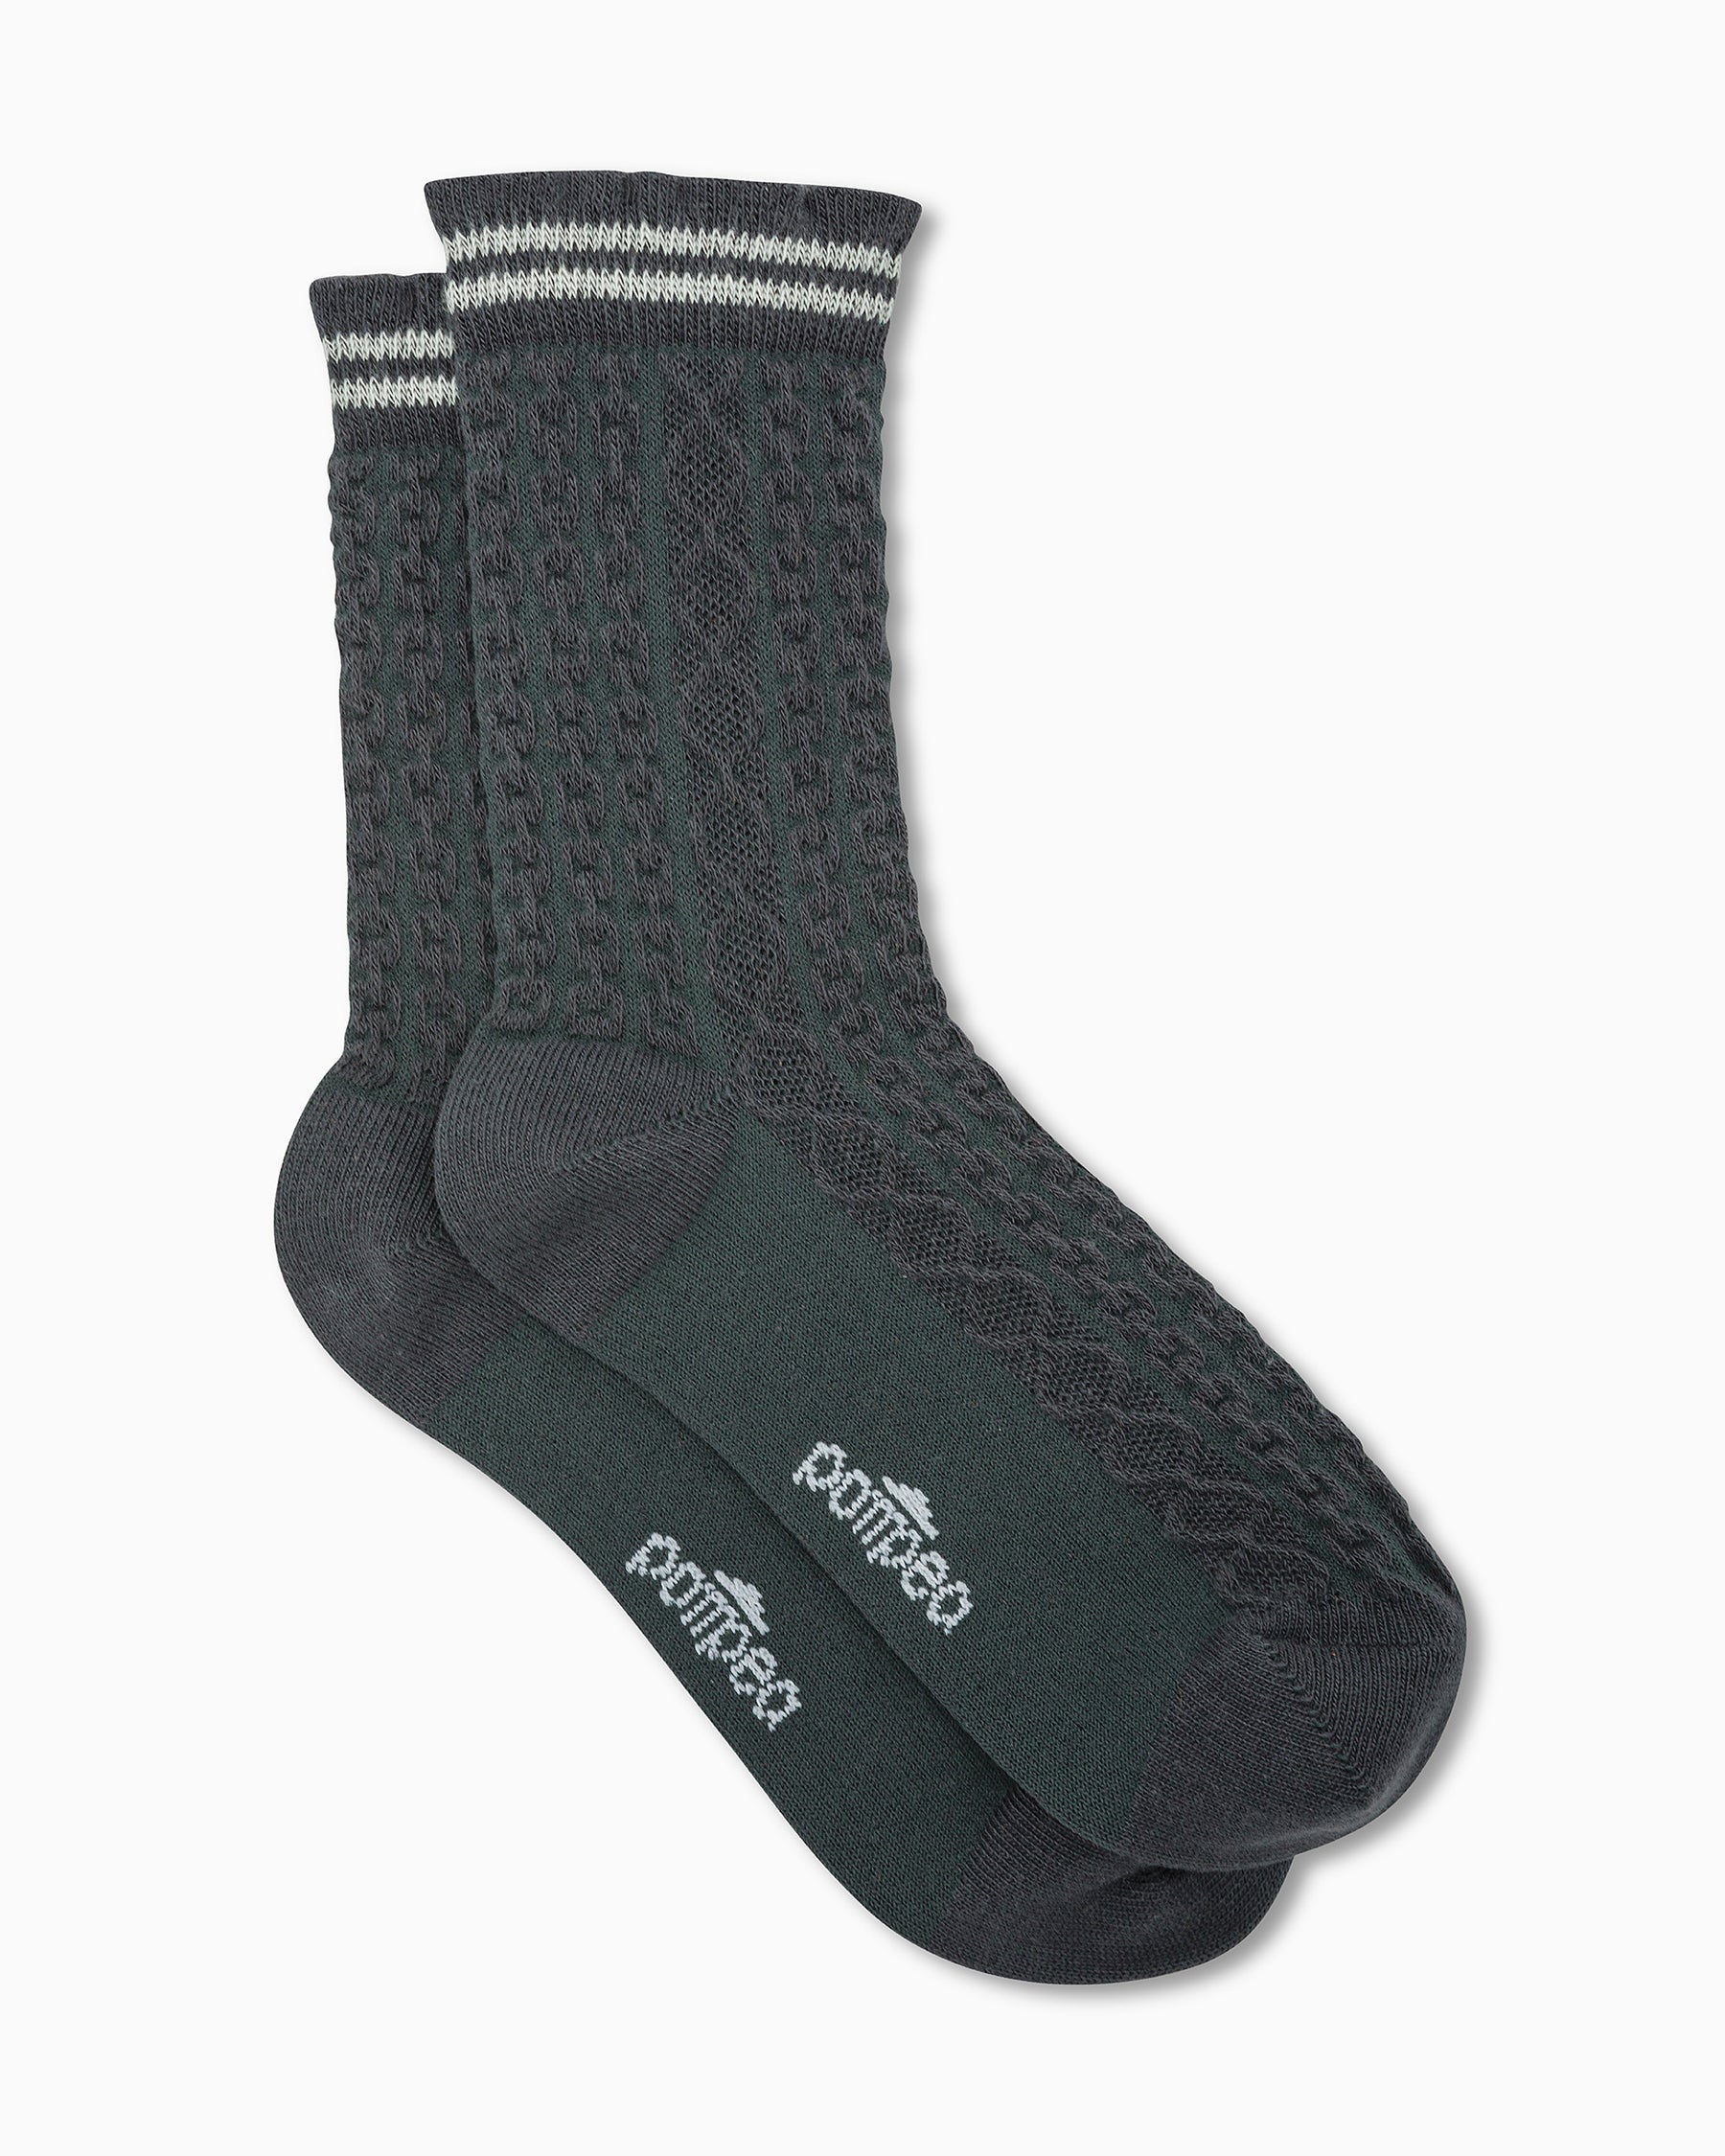 Paola girls' anthracite sock with knitted design, Pompea